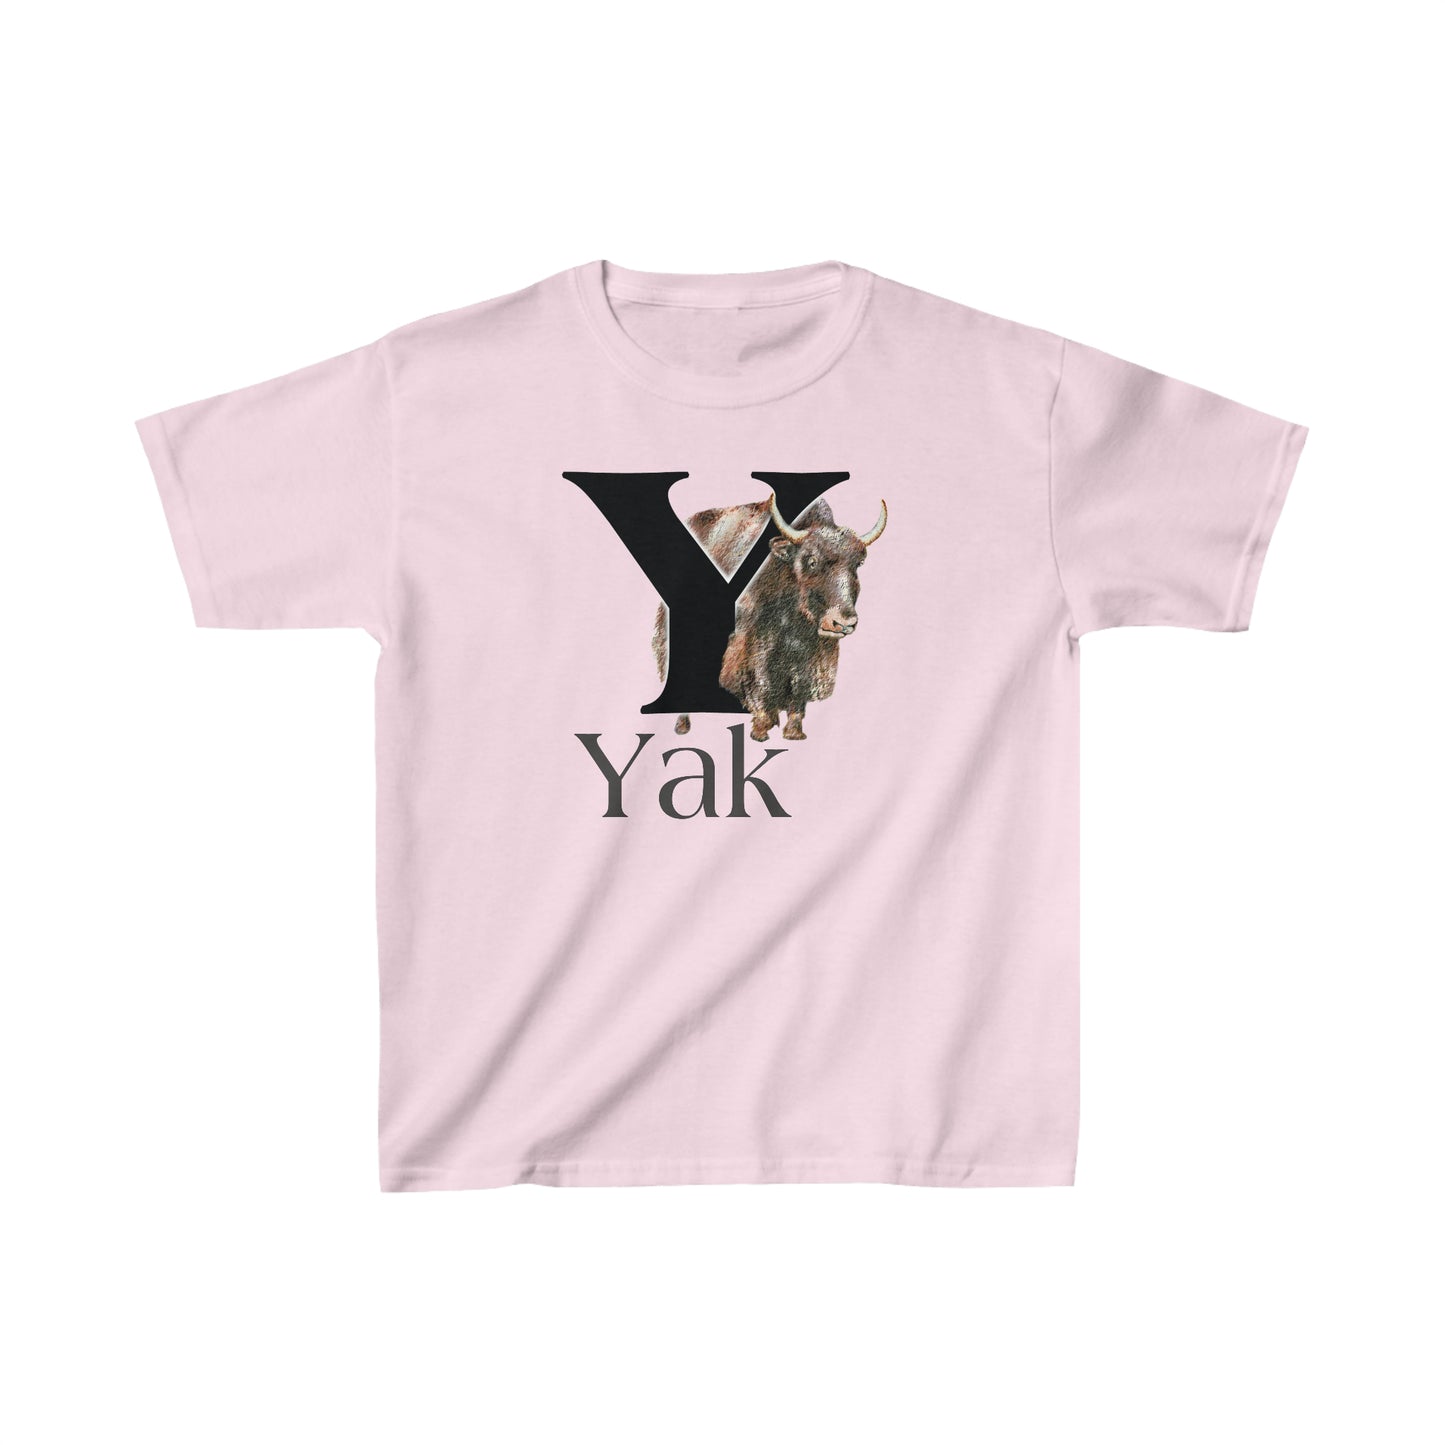 Y is for Yak T-shirt. Yak Drawing T-Shirt, Yak on shirt, Yak illustration, animal t-shirt, animal alphabet T, animal letters Tee